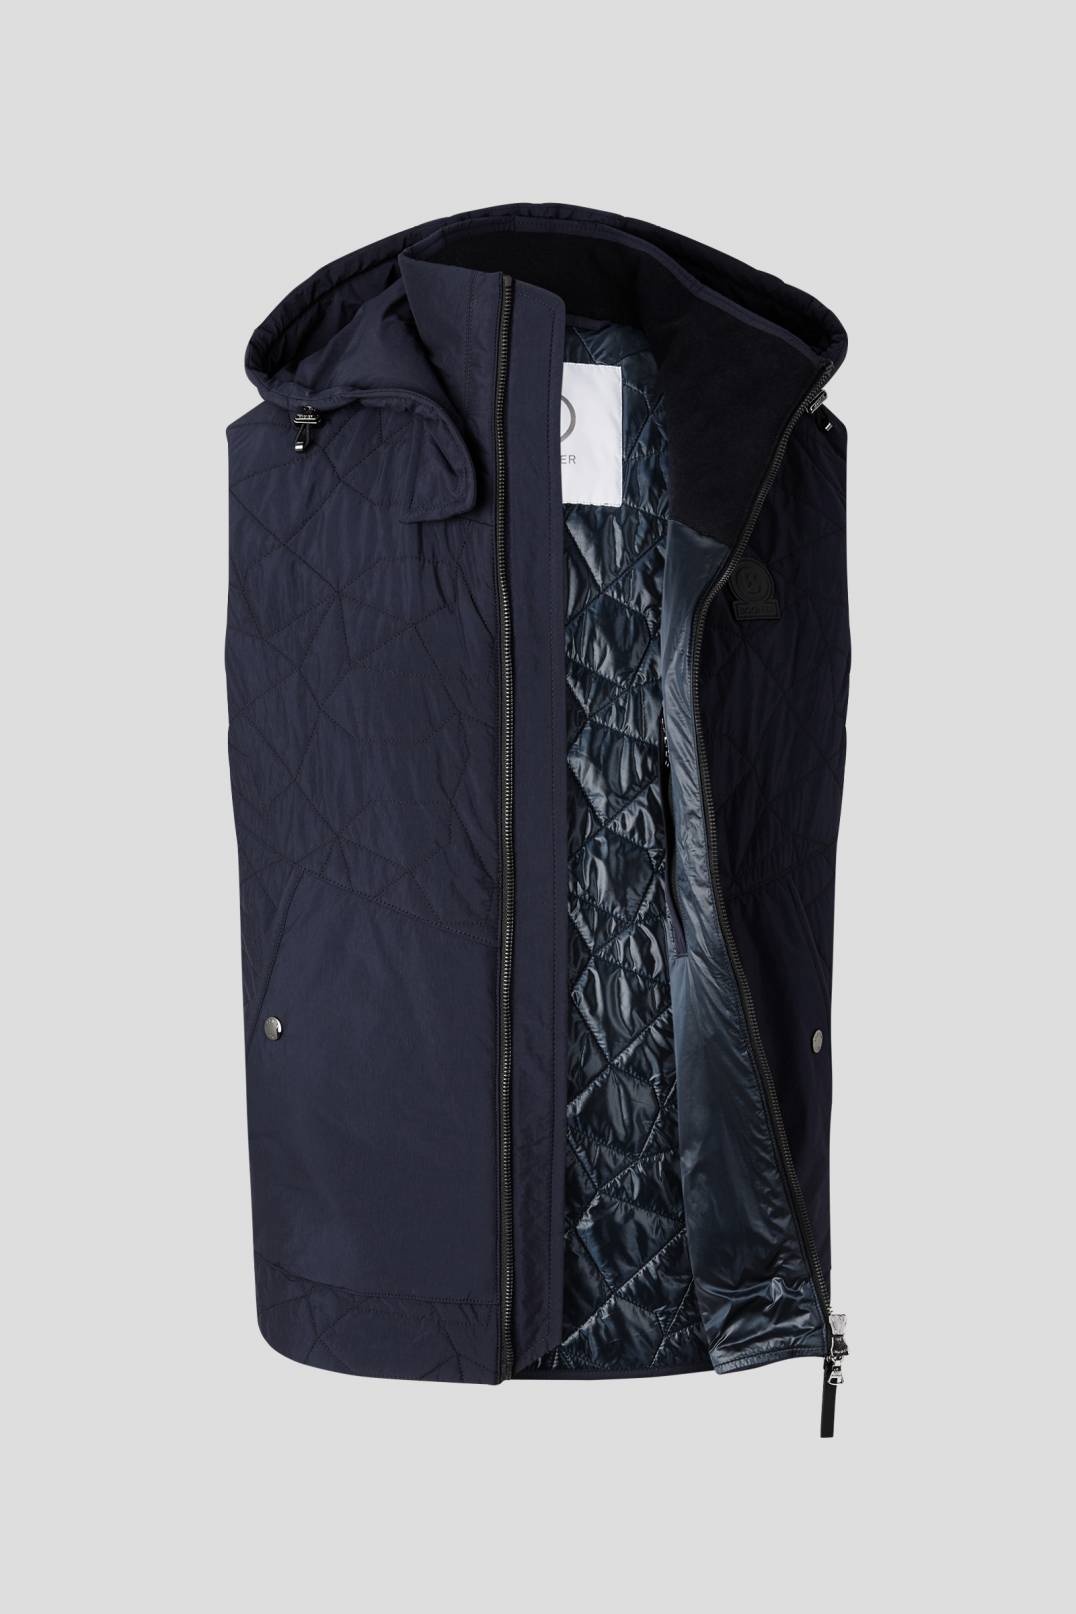 SIMON QUILTED WAISTCOAT IN NAVY BLUE - 2